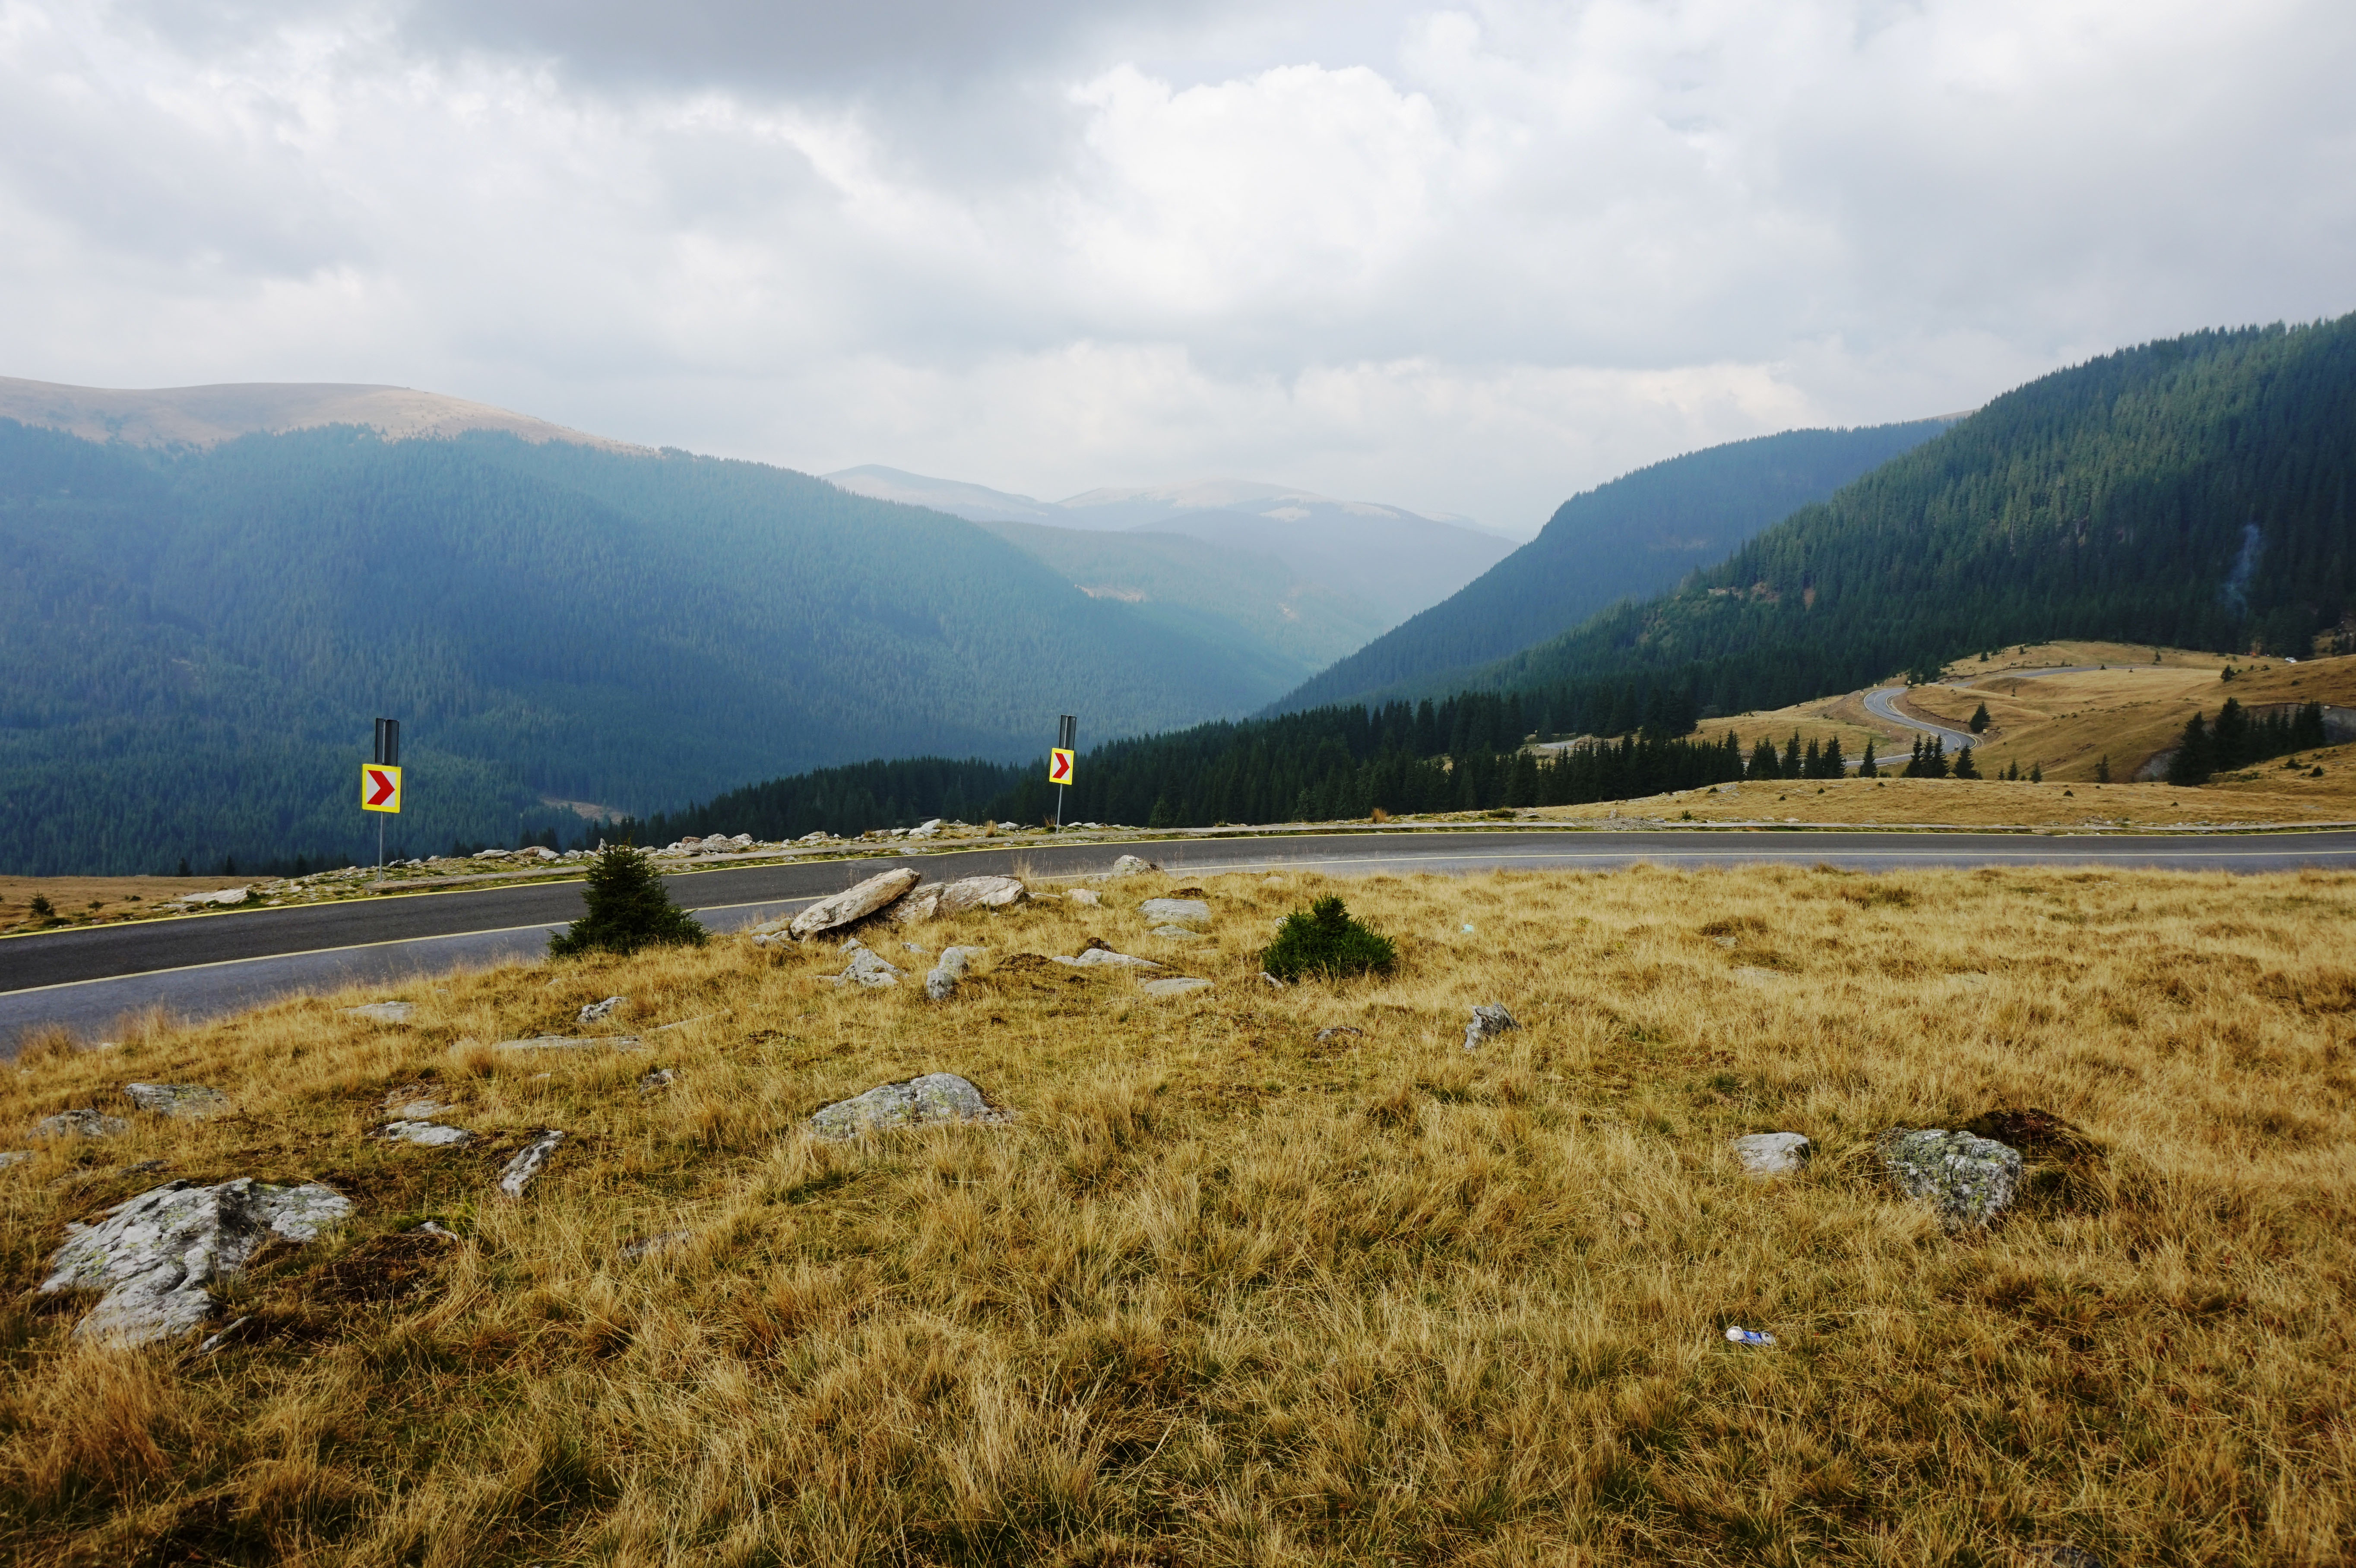 The TransAlpina is located in the Southern Carpathian mountain range of Romania